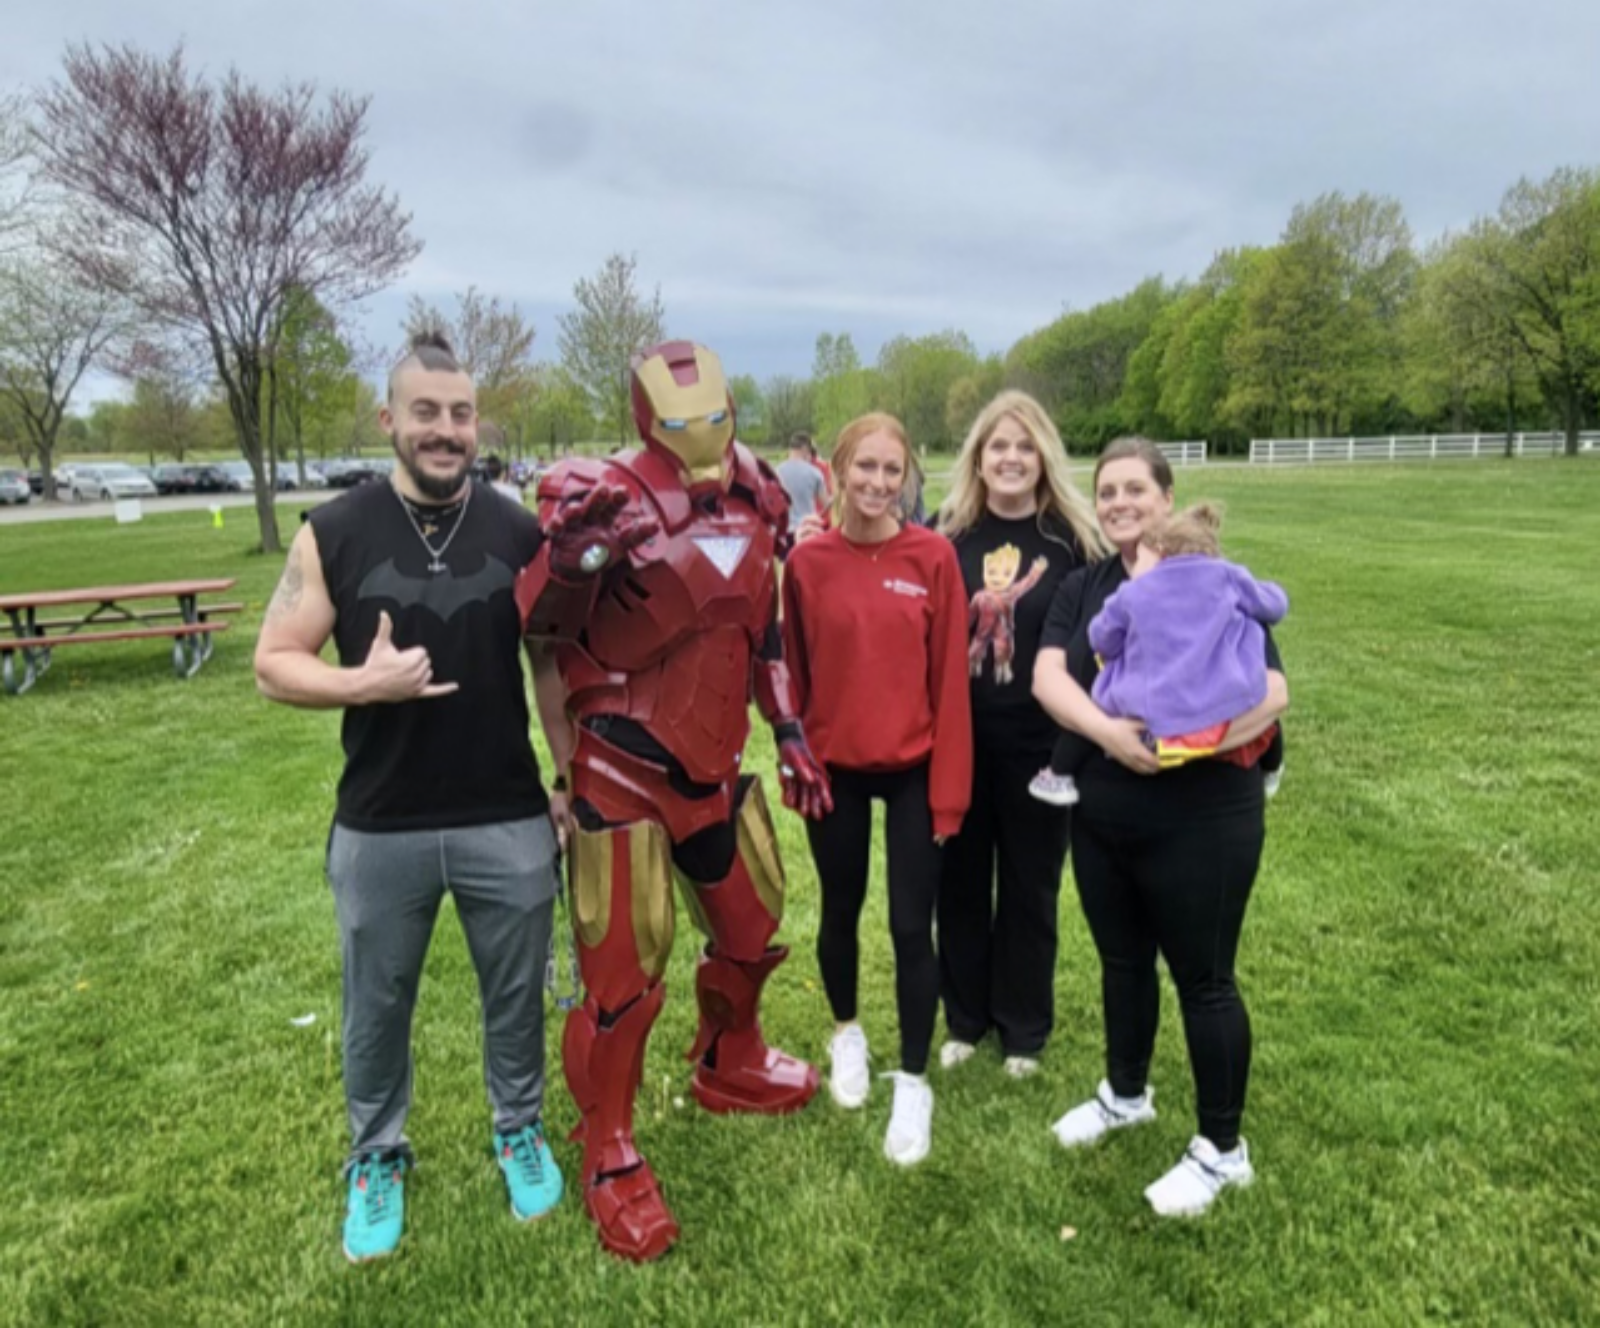 Electrophysiology Team Participated in the Superhero 5K